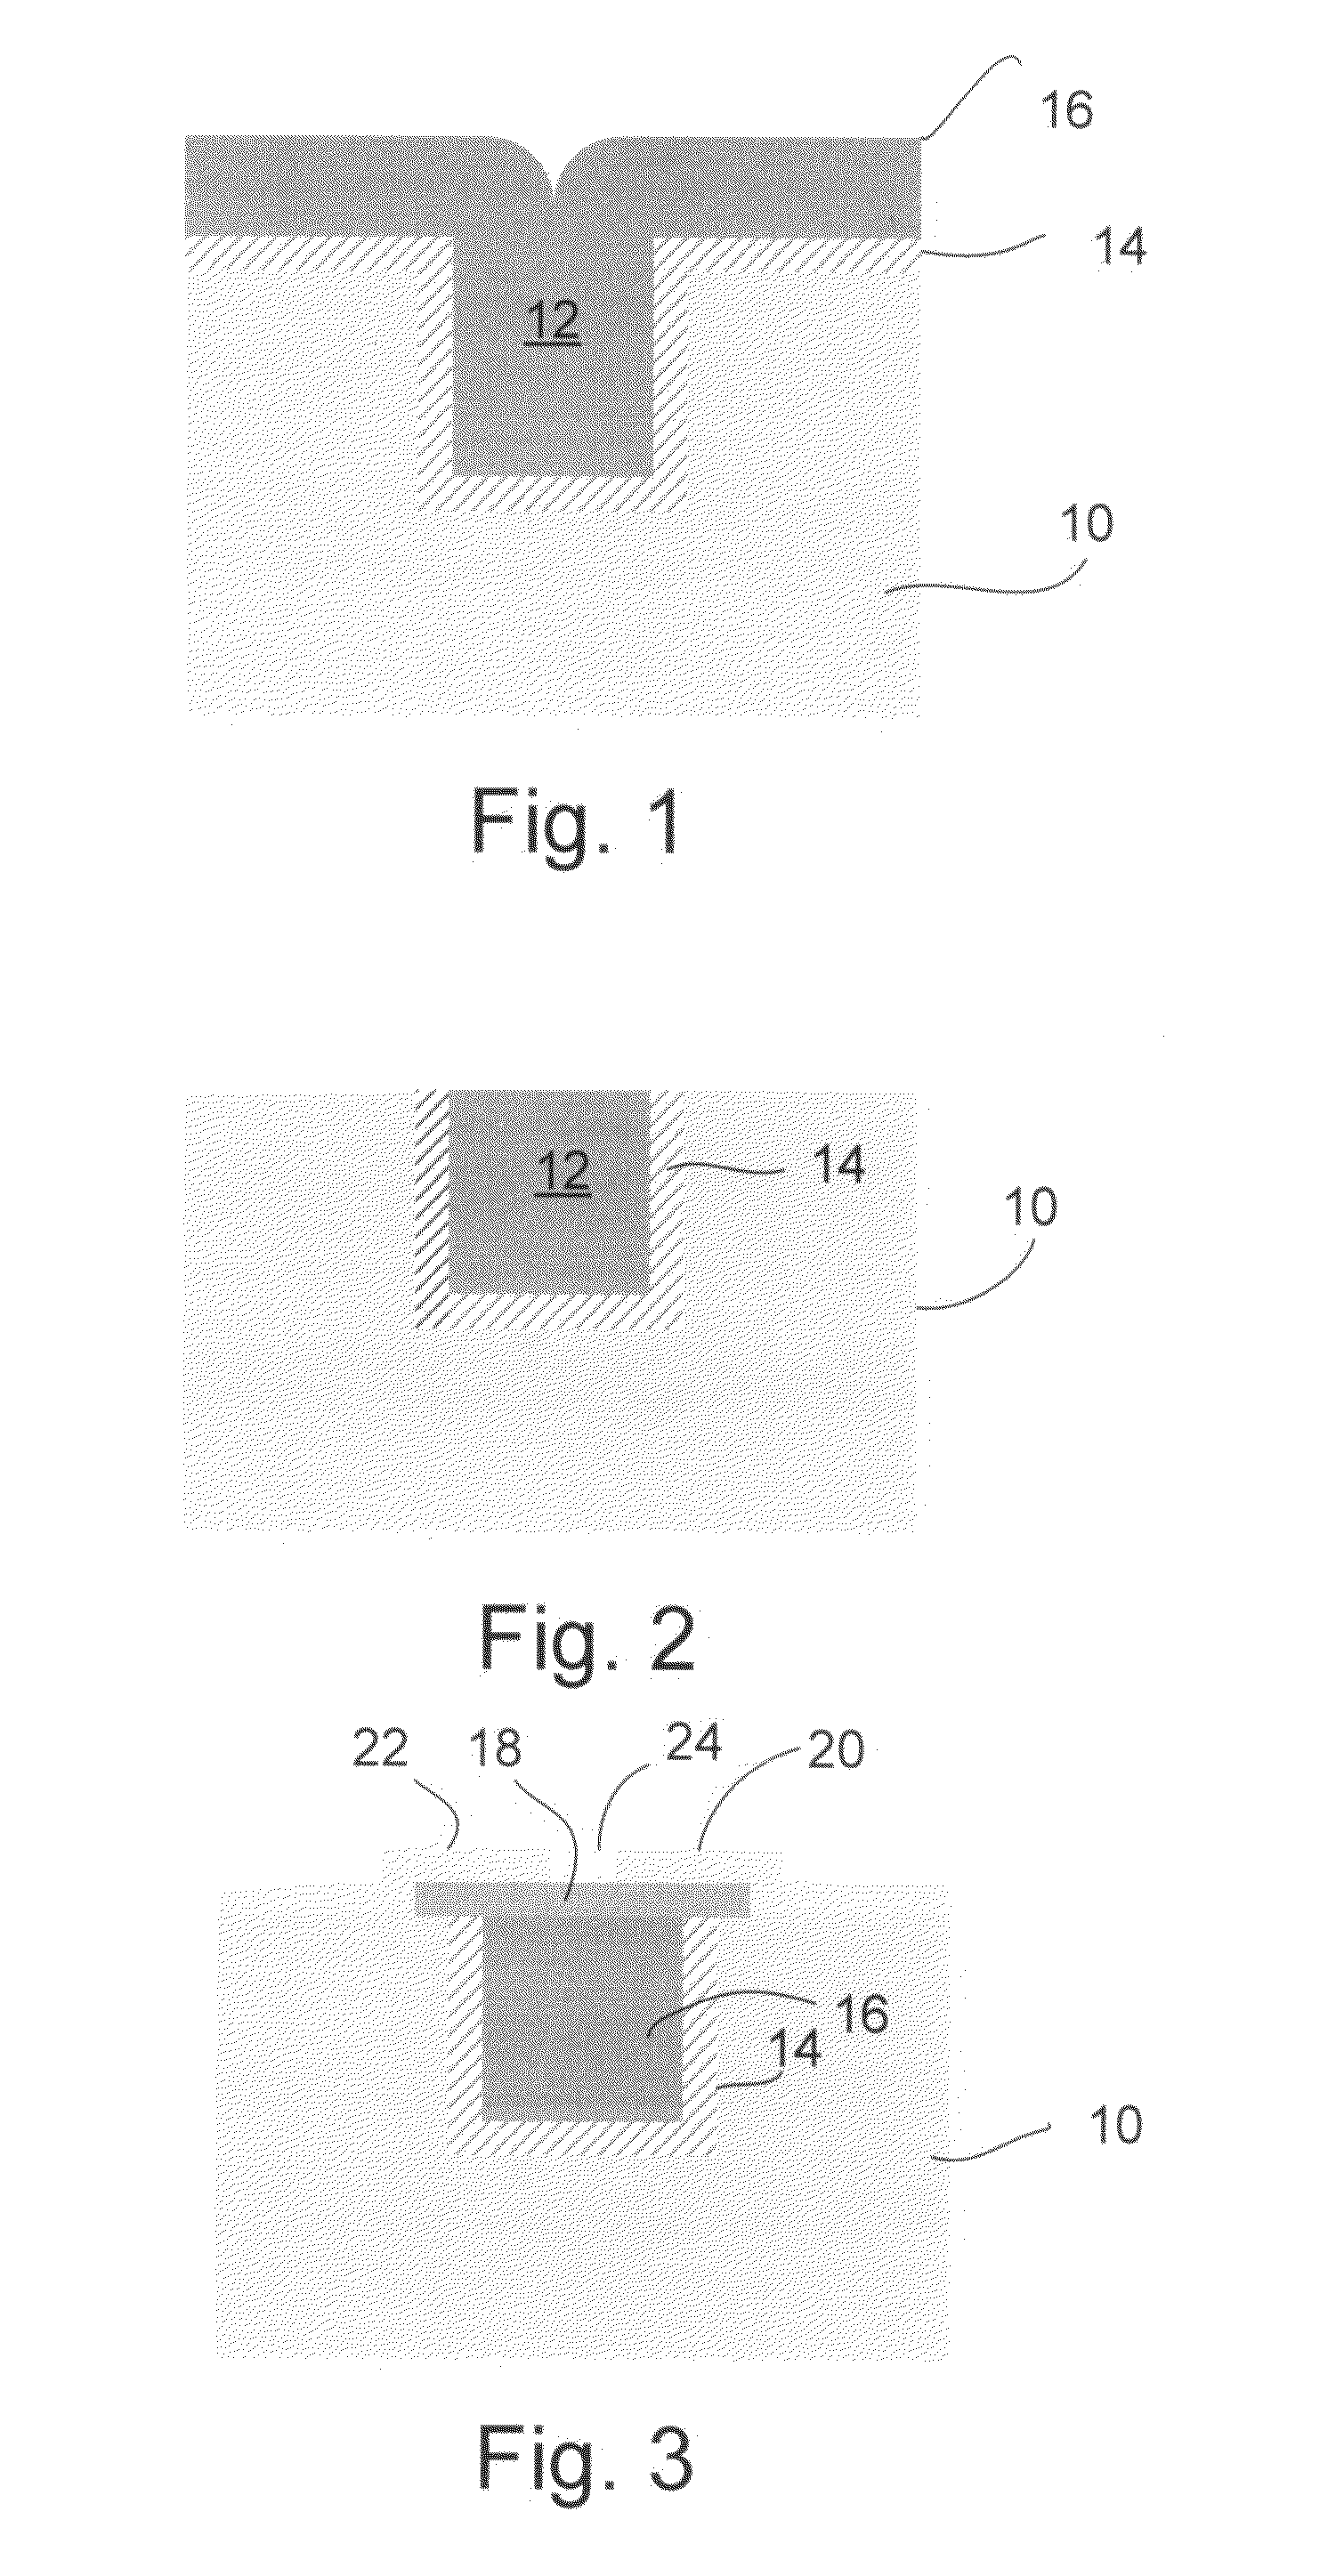 Inertial switch using fully released and enclosed conductive contact bridge